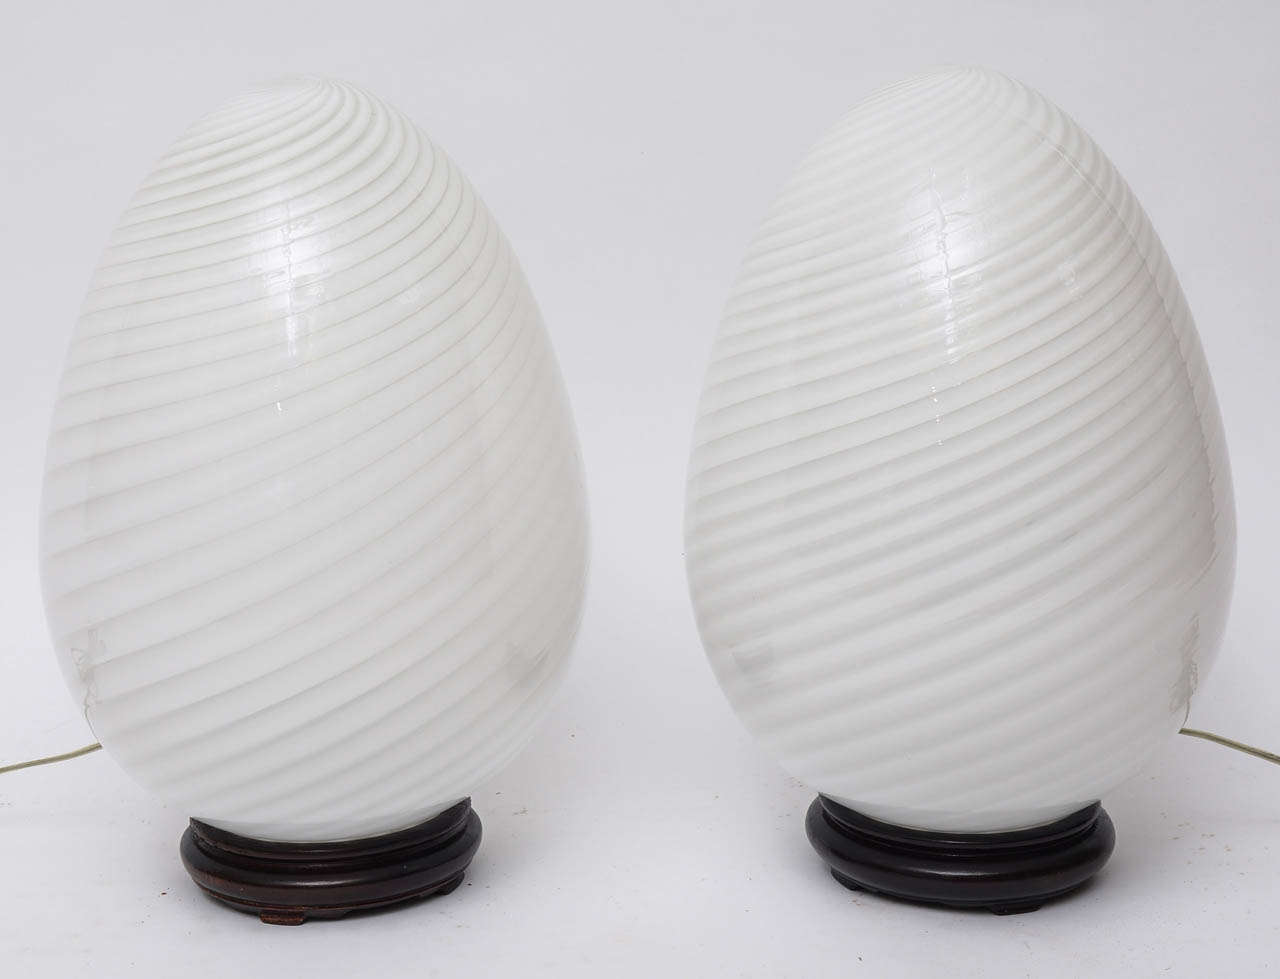 Pair of white swirled glass table lamps.